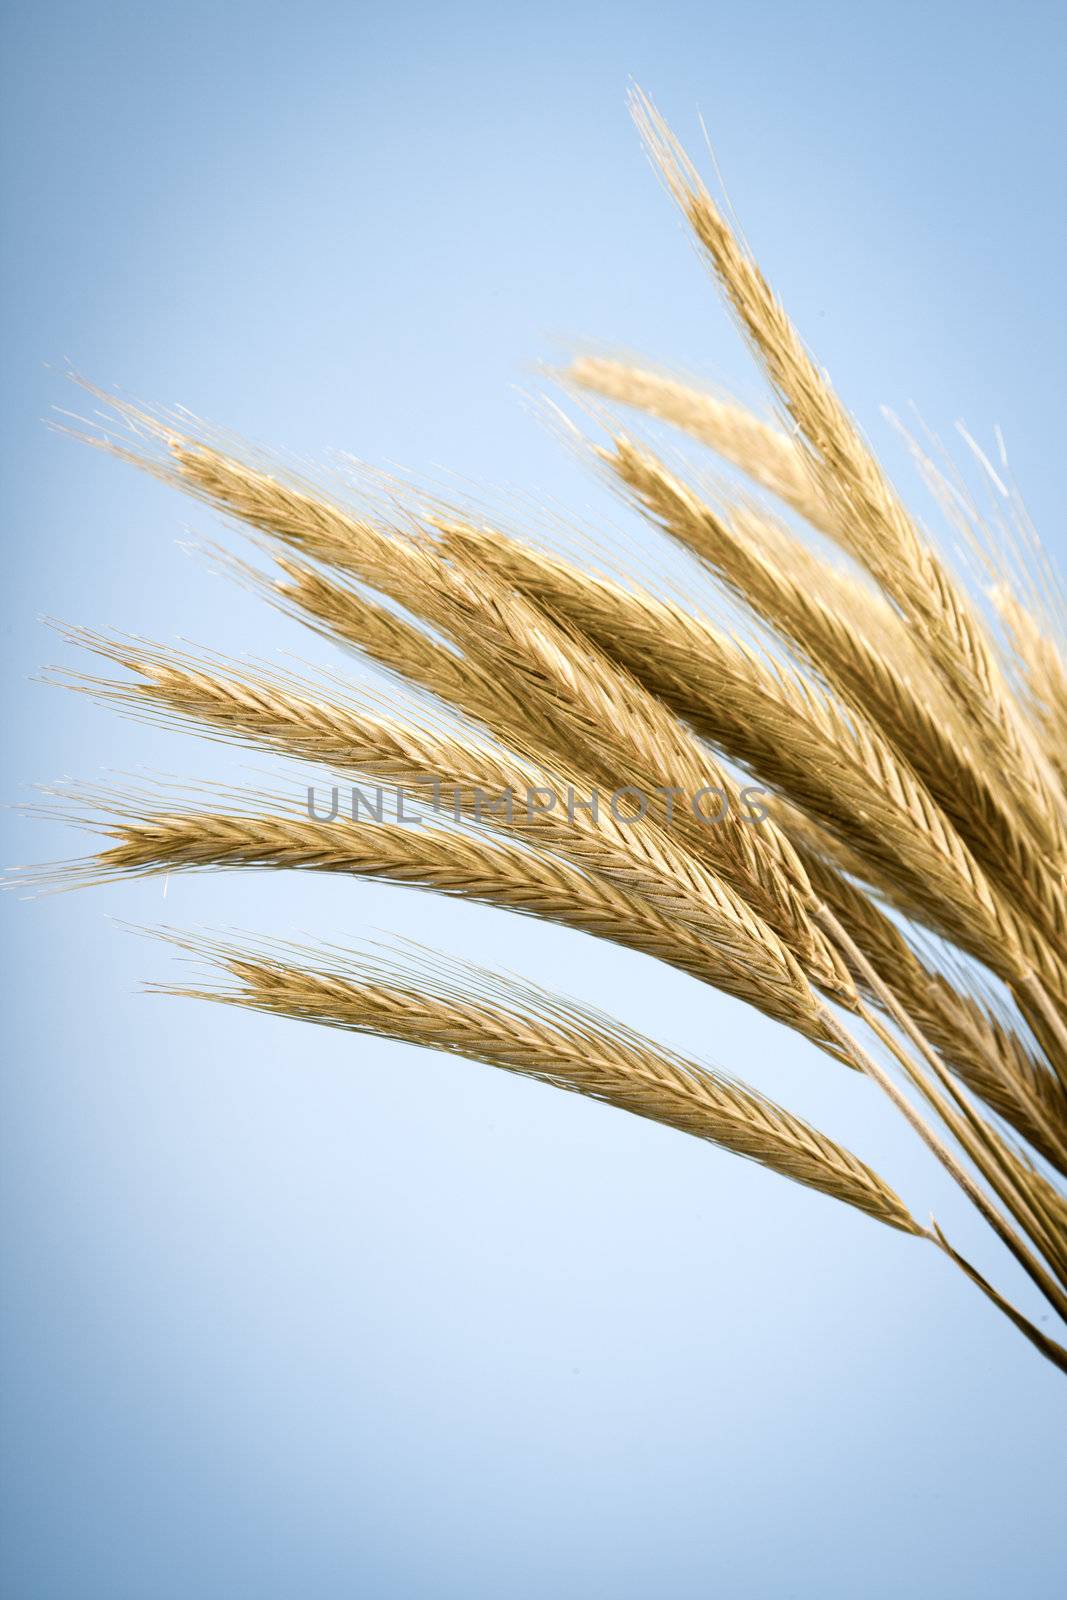 yellow ears of wheat, on blue background